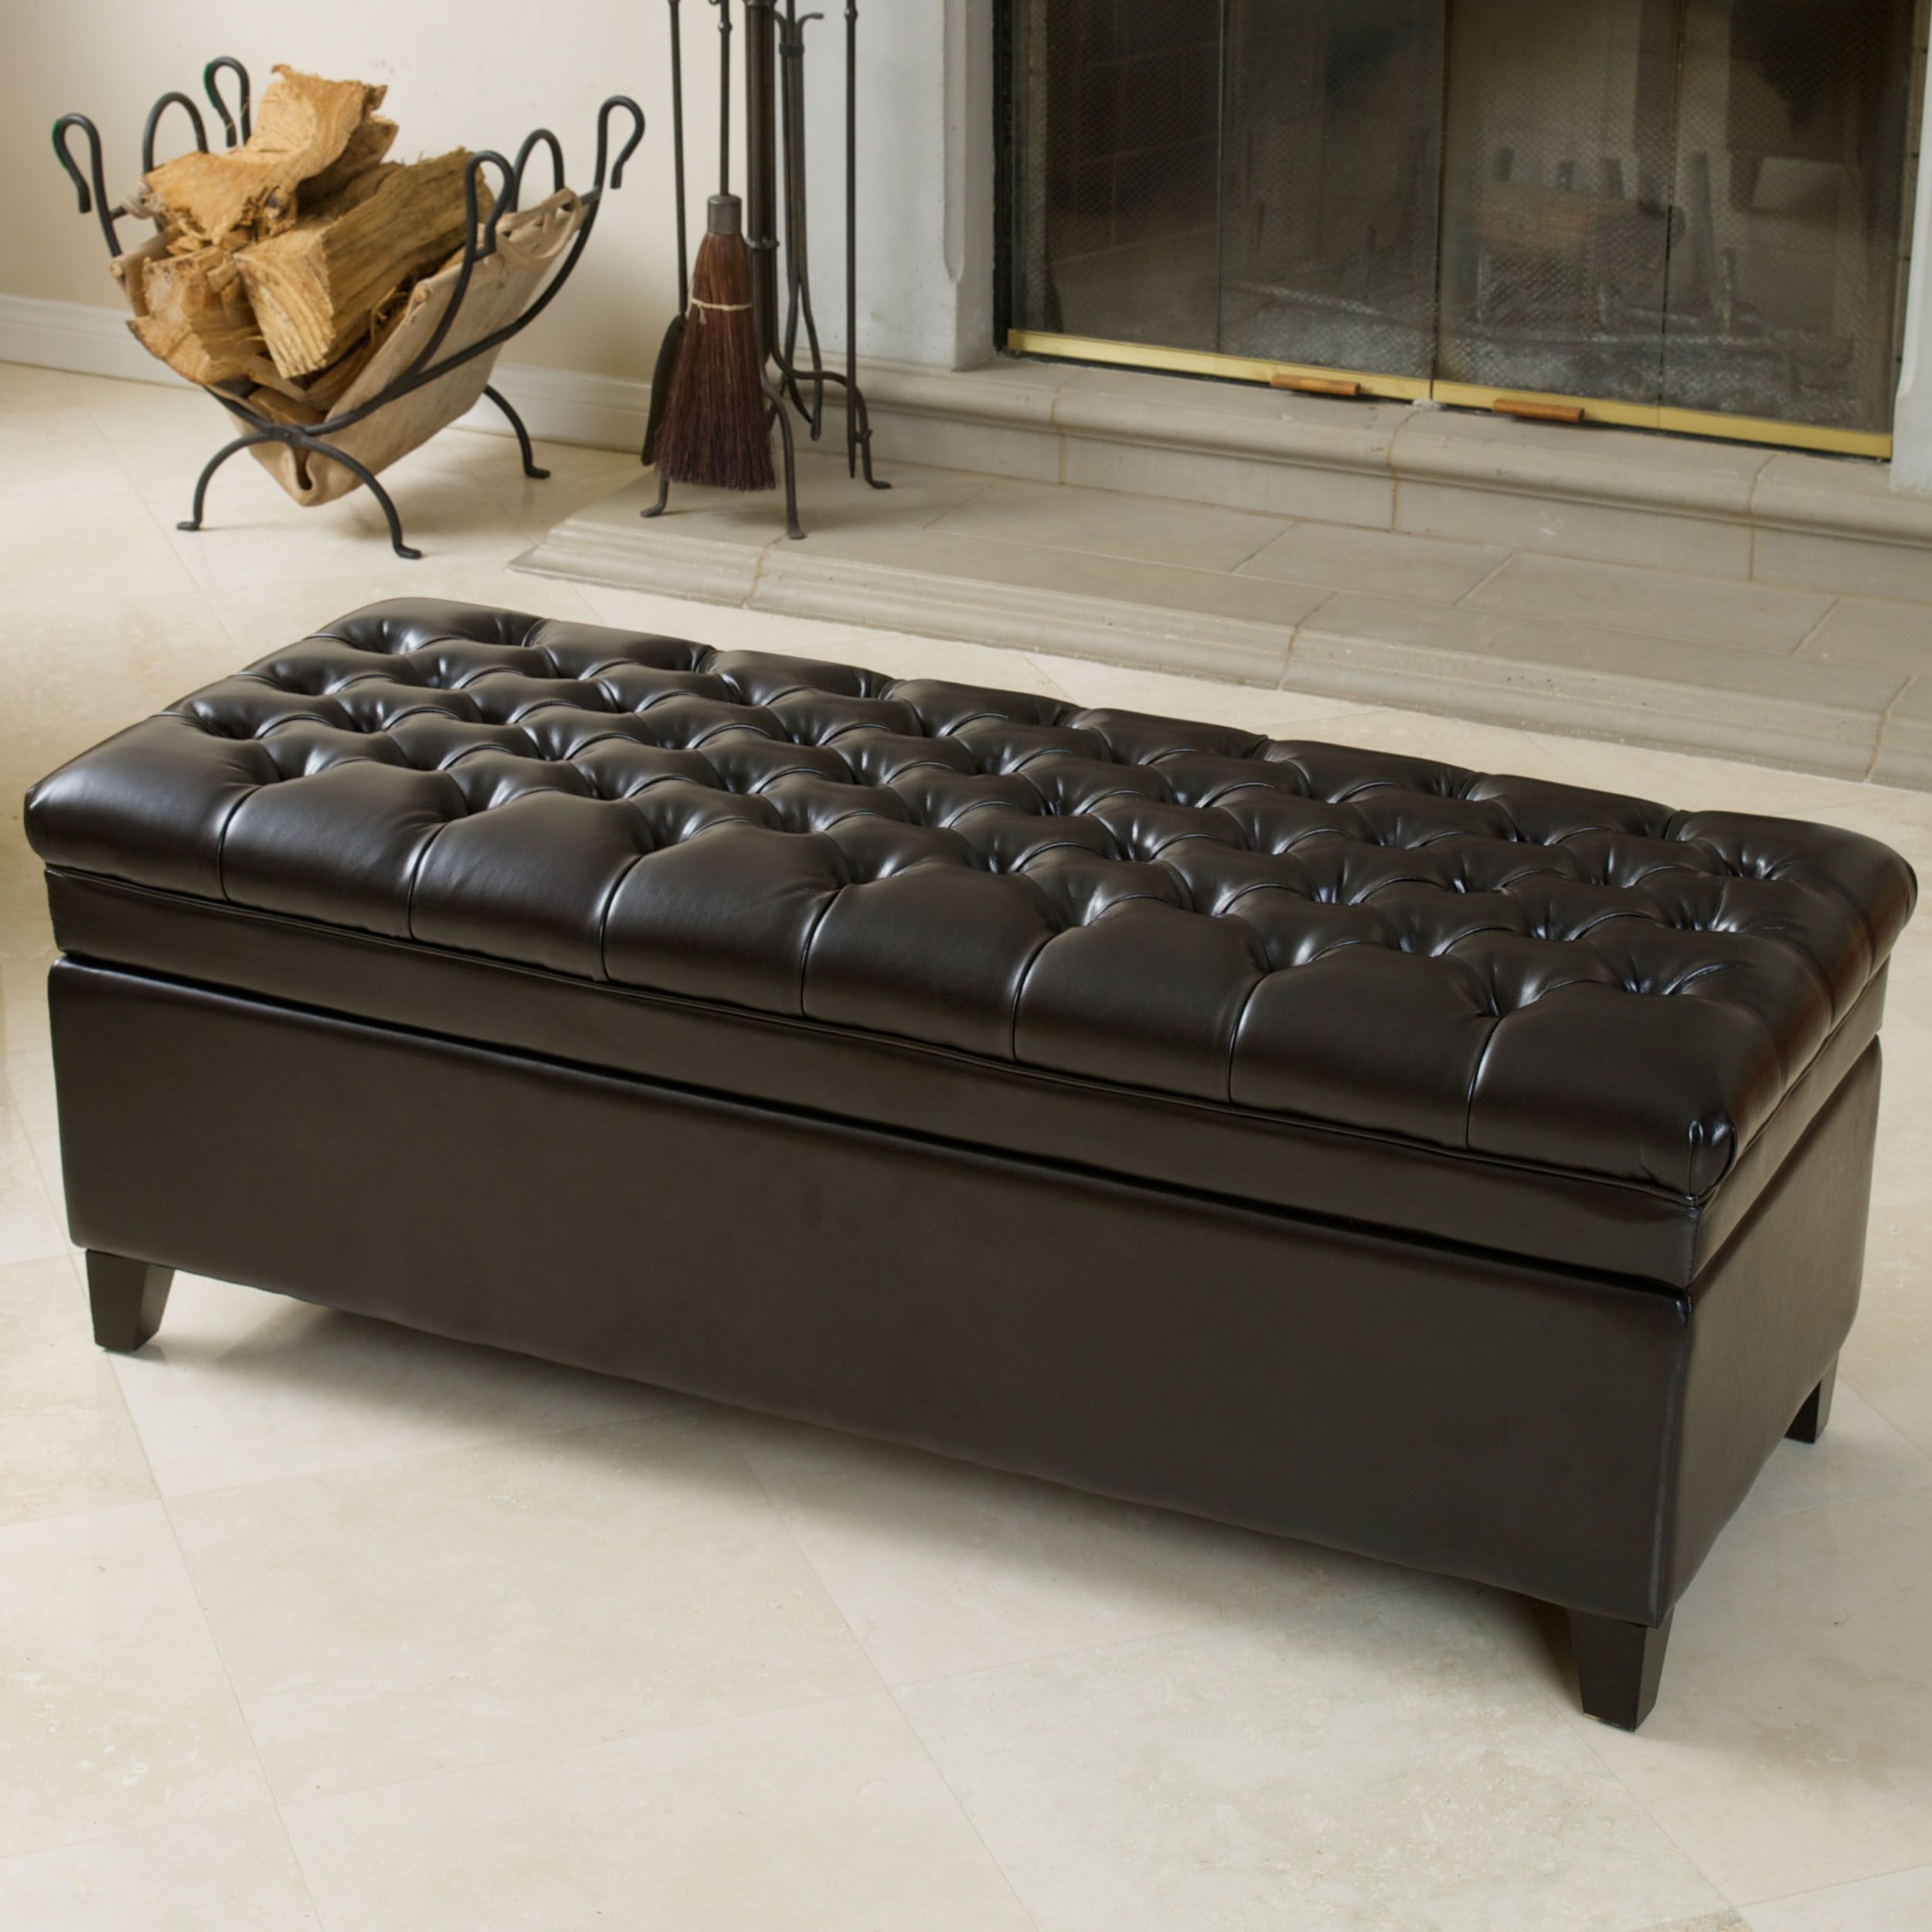 Bennette Tufted Espresso Brown Leather Storage Ottoman – Walmart Throughout Espresso Leather And Tan Canvas Pouf Ottomans (View 5 of 20)